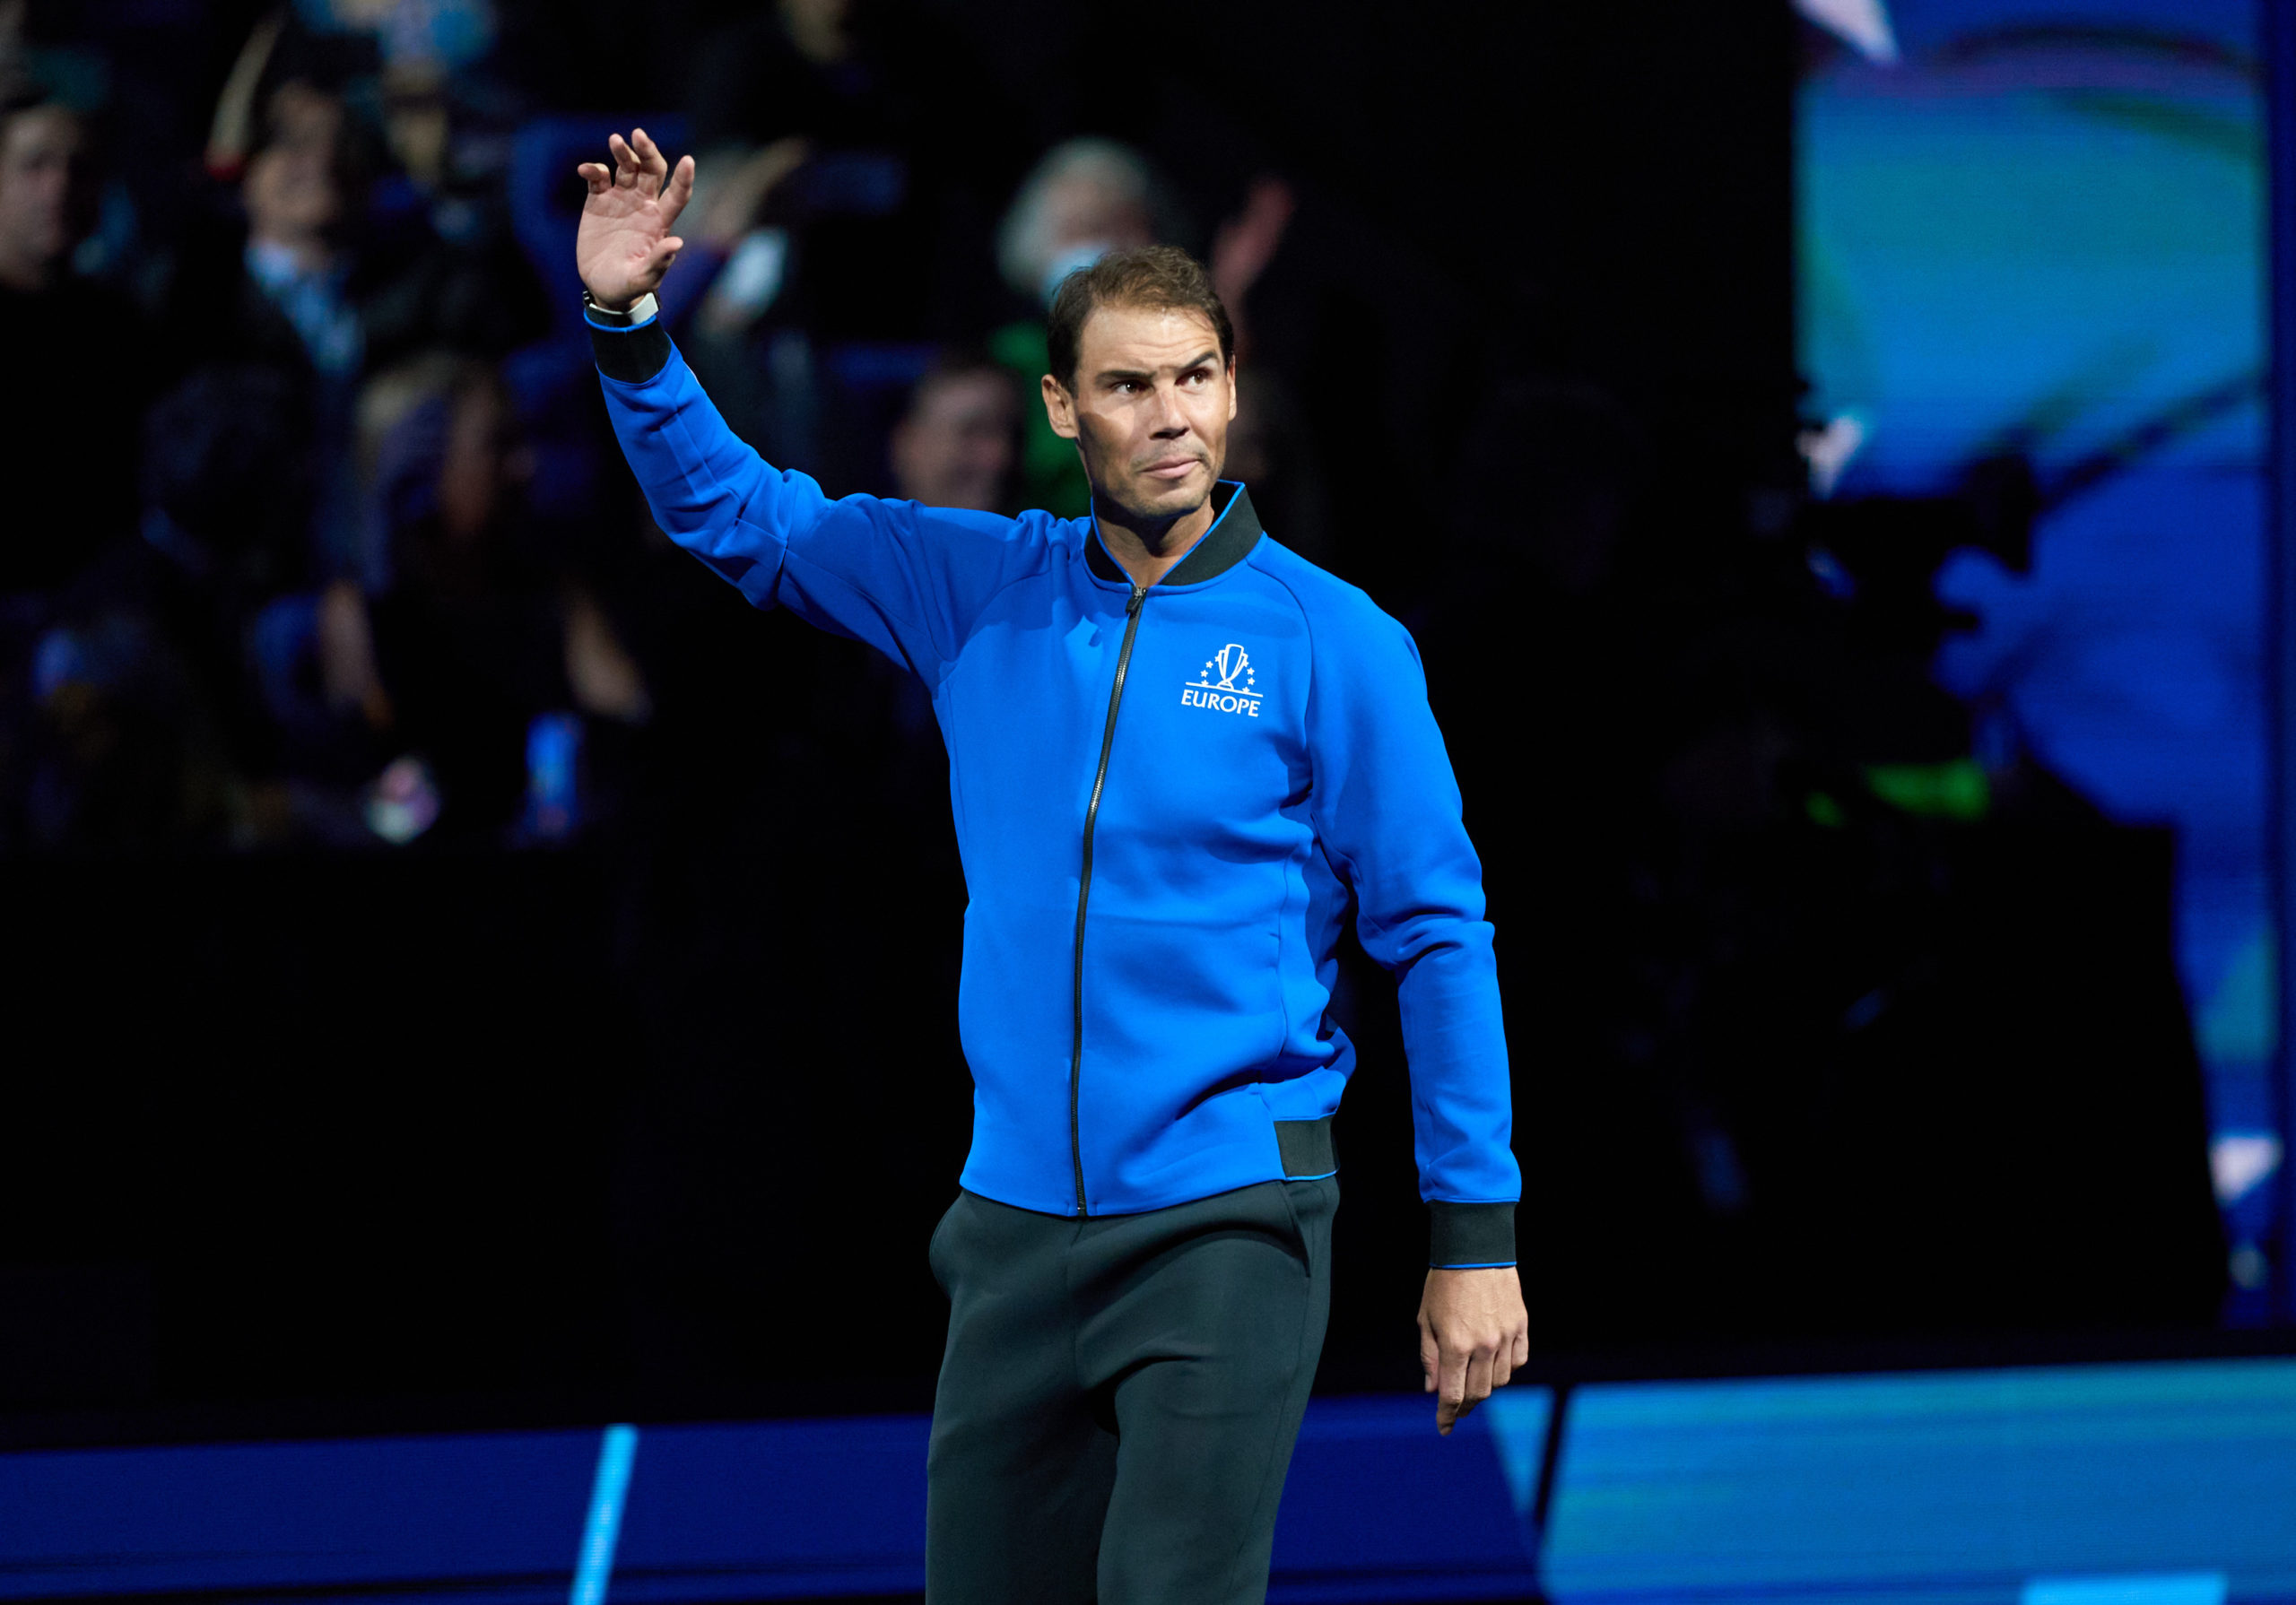 Sep 23, 2022; London, United Kingdom;  Rafael Nadal (ESP) of Team Europe  arrives on court for the opening of the Laver Cup tennis event.